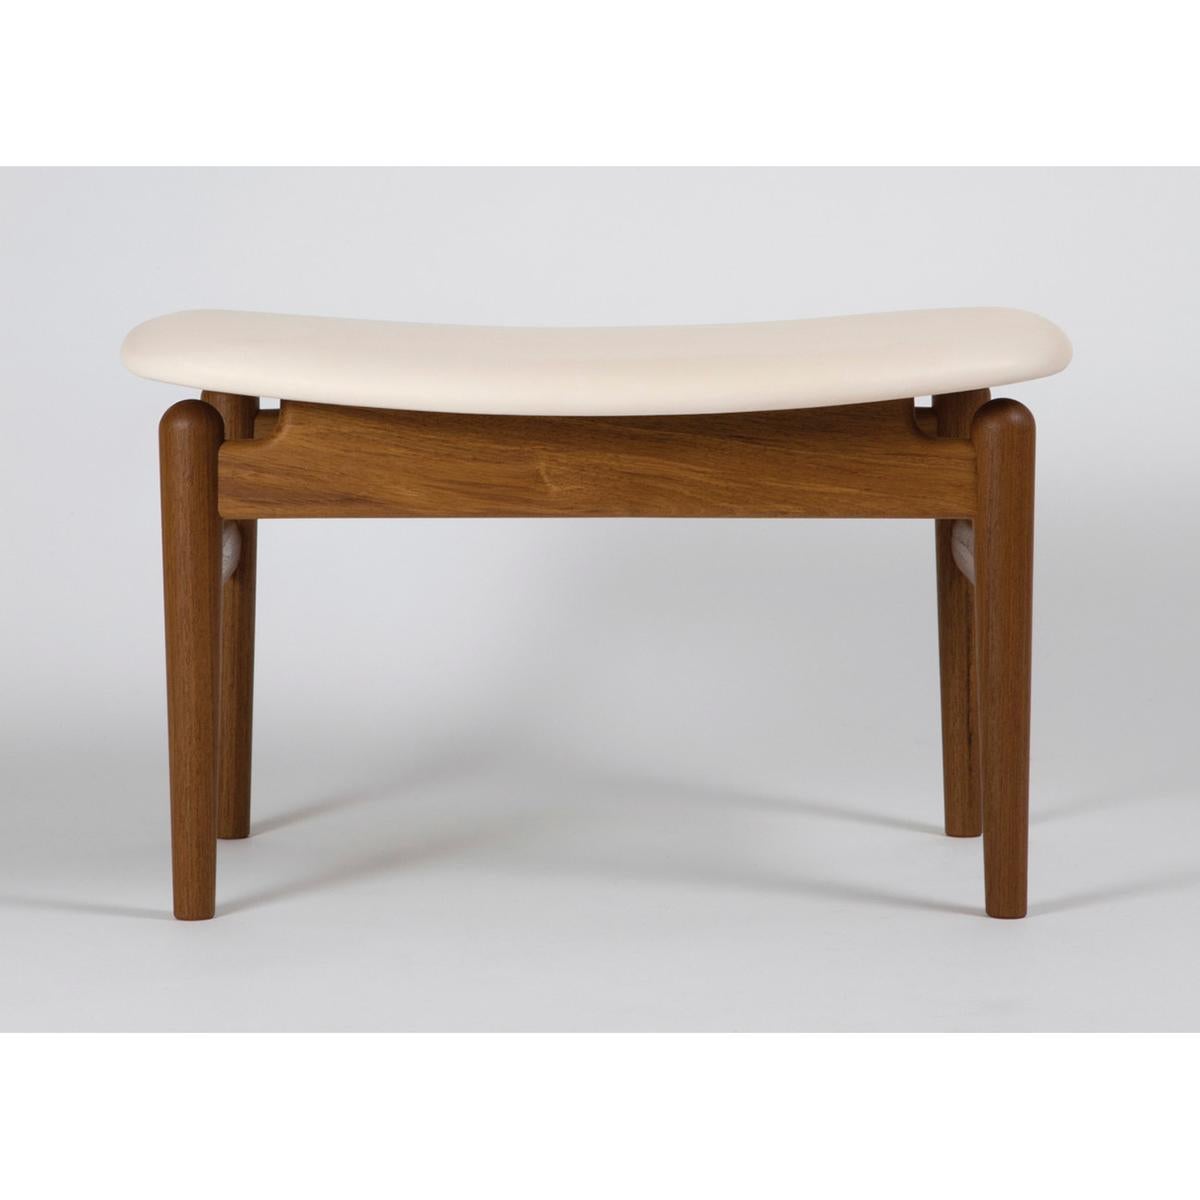 Set of Chieftain Sofa Couch and Chieftain Stool in Wood and Leather by Finn Juhl 1